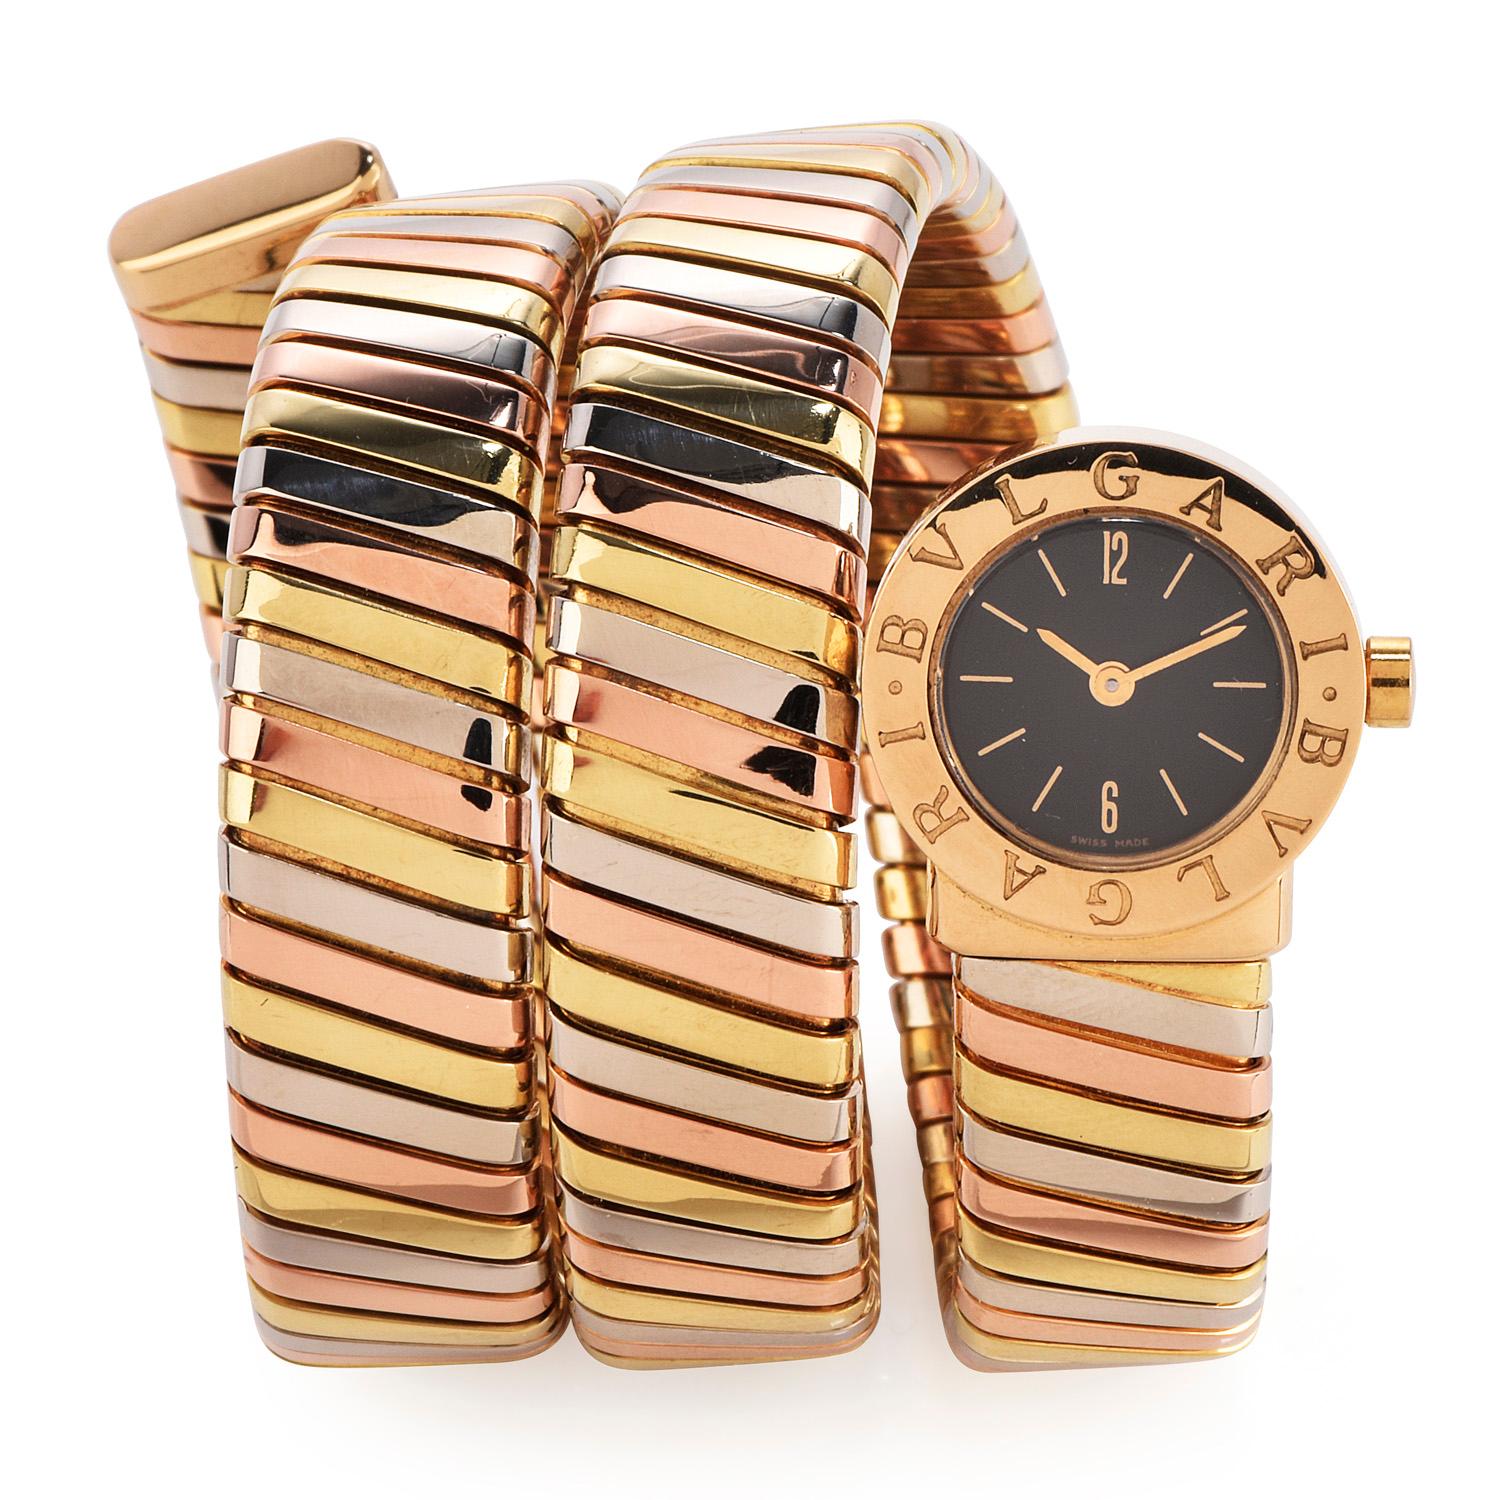 This 1990's Serpenti Tubogas Watch Designed by Bvlgari France offers flexibility and the perfect complement for any ensemble.

Crafted in pure 150.7 grams of 18K rose, white, and yellow gold.

This quartz movement watch features a black tone dial